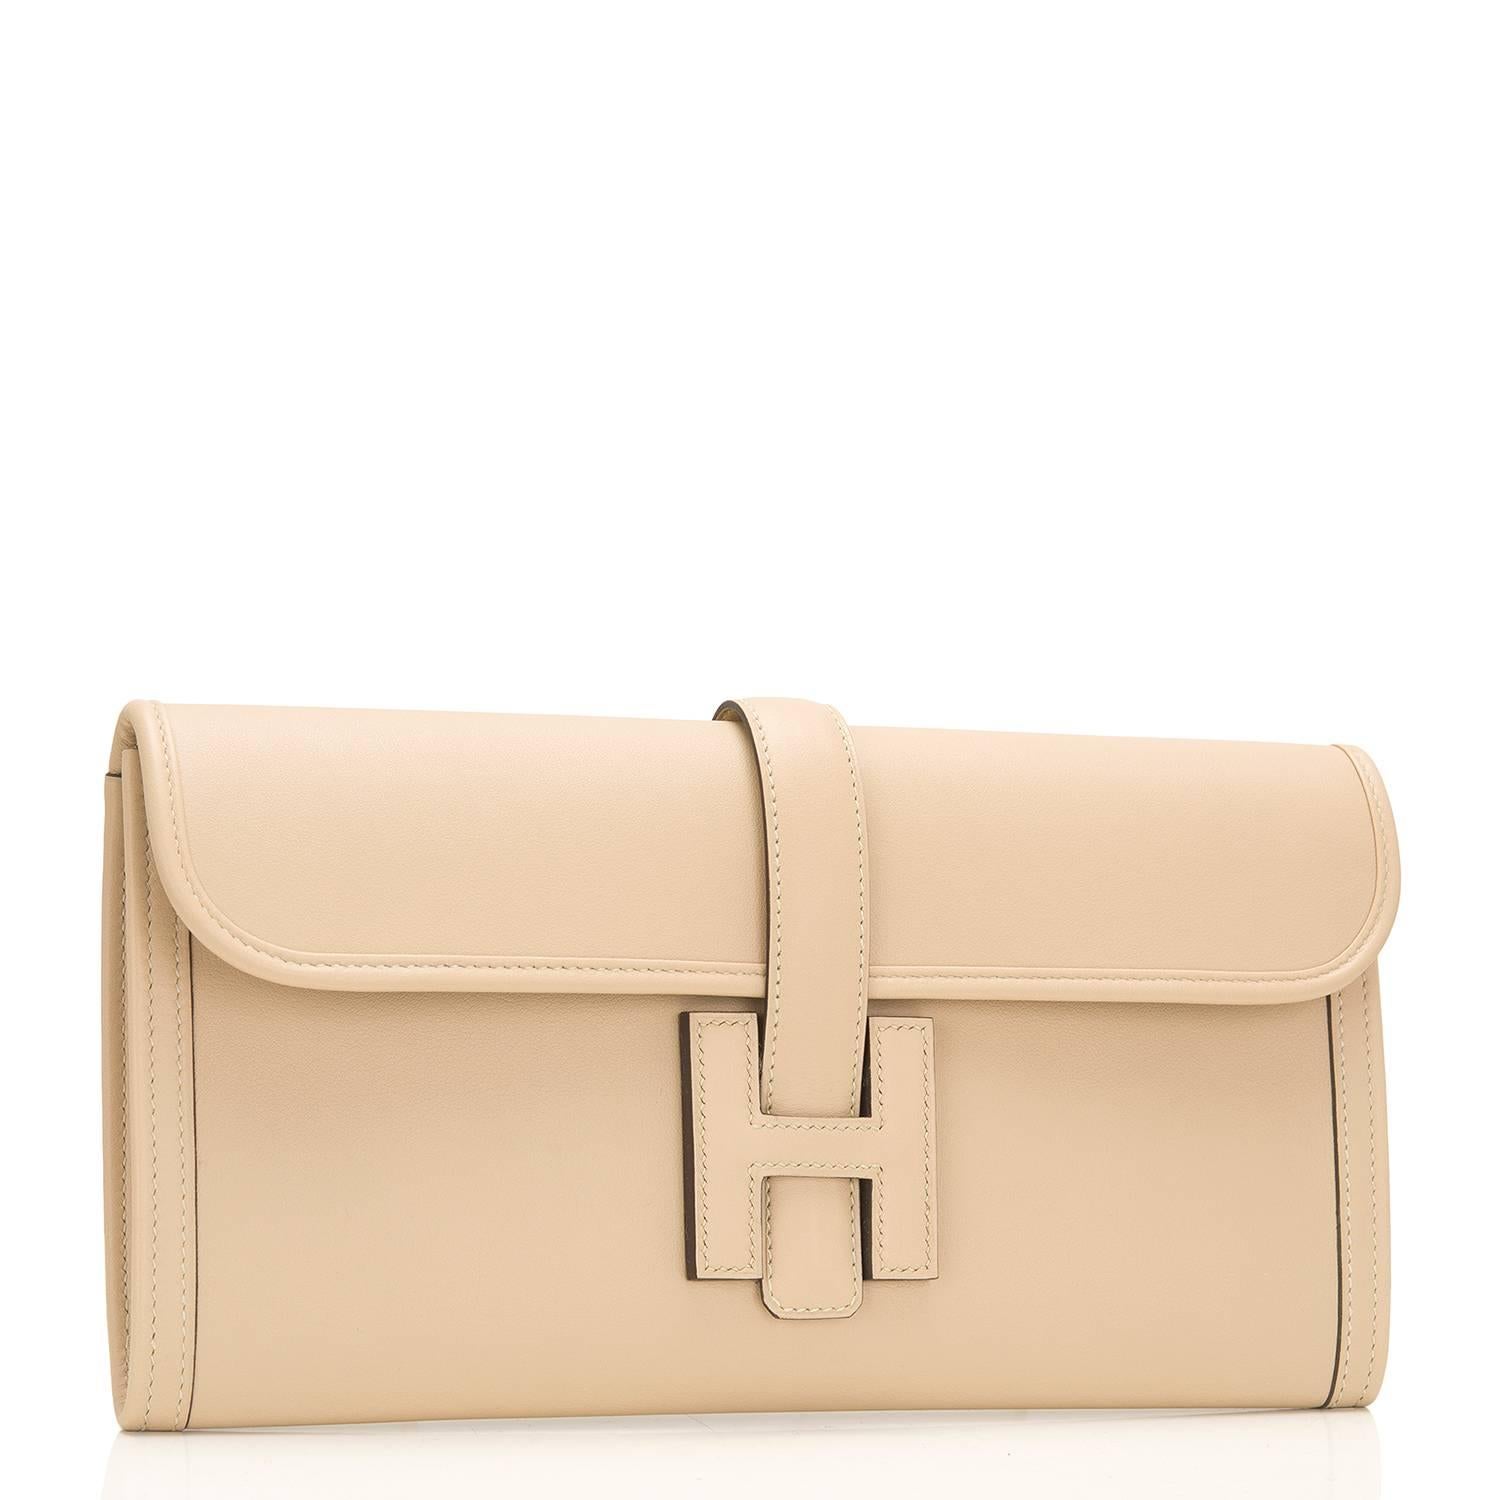 Hermes Trench Jige Elan clutch 29cm of swift leather. 

This Jige clutch has tonal stitching and front 